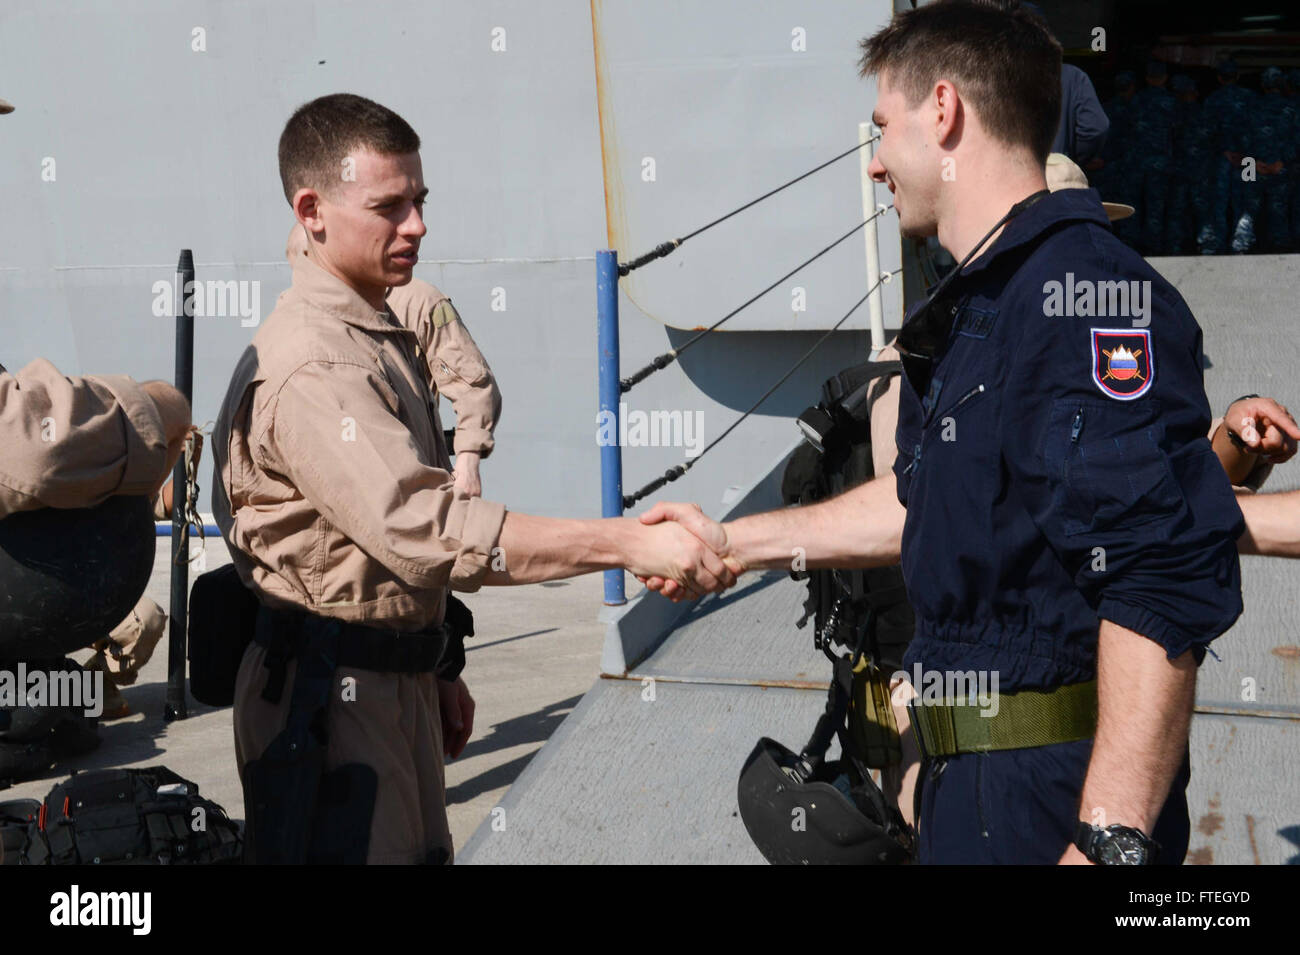 SPLIT, Croatia (Oct. 7, 2014) Aviation Boatswain's Mate (Handling) 2nd Class Travis Starr shakes the hand of a member of the Slovenian navy in front of the amphibious transport dock ship USS Mesa Verde (LPD 19) after participating in a joint visit, board, search and seizure (VBSS) training with members of the Croatian and Slovenian navies during a scheduled port visit. Mesa Verde, part of the Bataan Amphibious Ready Group with the embarked 22nd Marine Expeditionary Unit, is conducting naval operations in the U.S. 6th Fleet area of operations in support of U.S. national secur Stock Photo